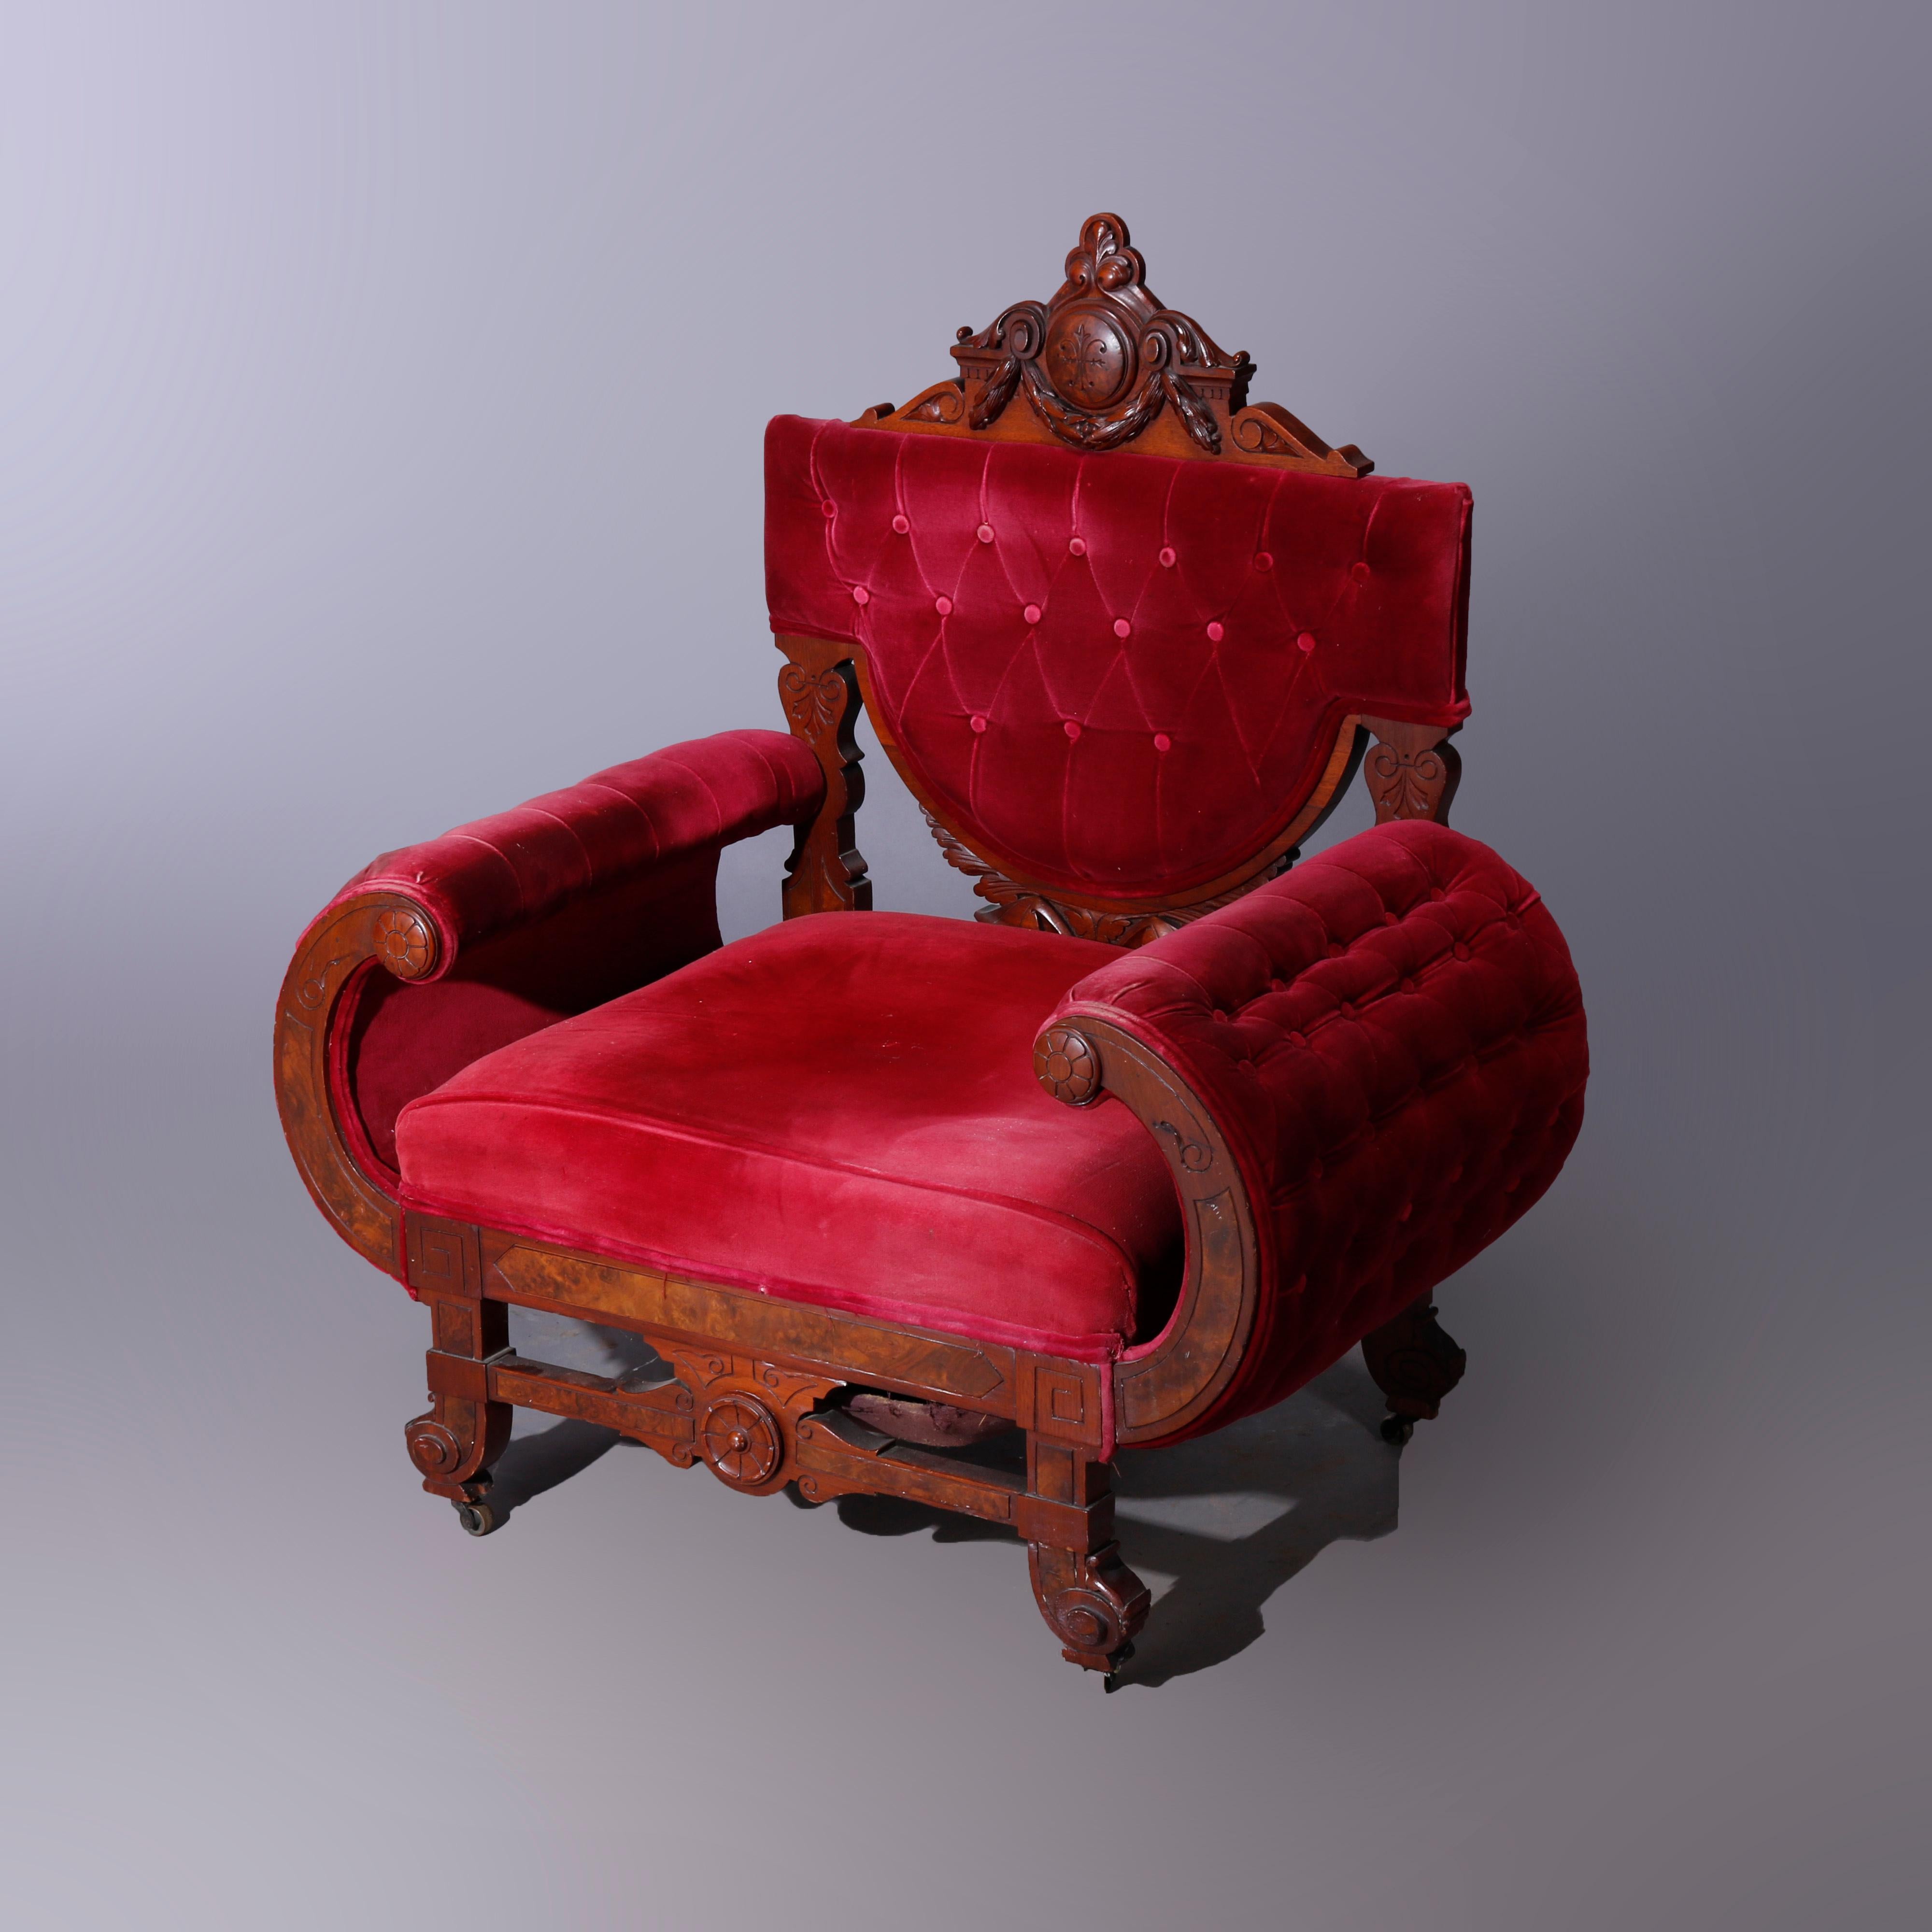 An antique Egyptian Revival throne chair offers walnut and burl construction with foliate carved crest over shaped button back with flanking curved arms and raised on stylized scroll feet, c1870

Measures - 41''H x 37''W x 23.5''D; seat height